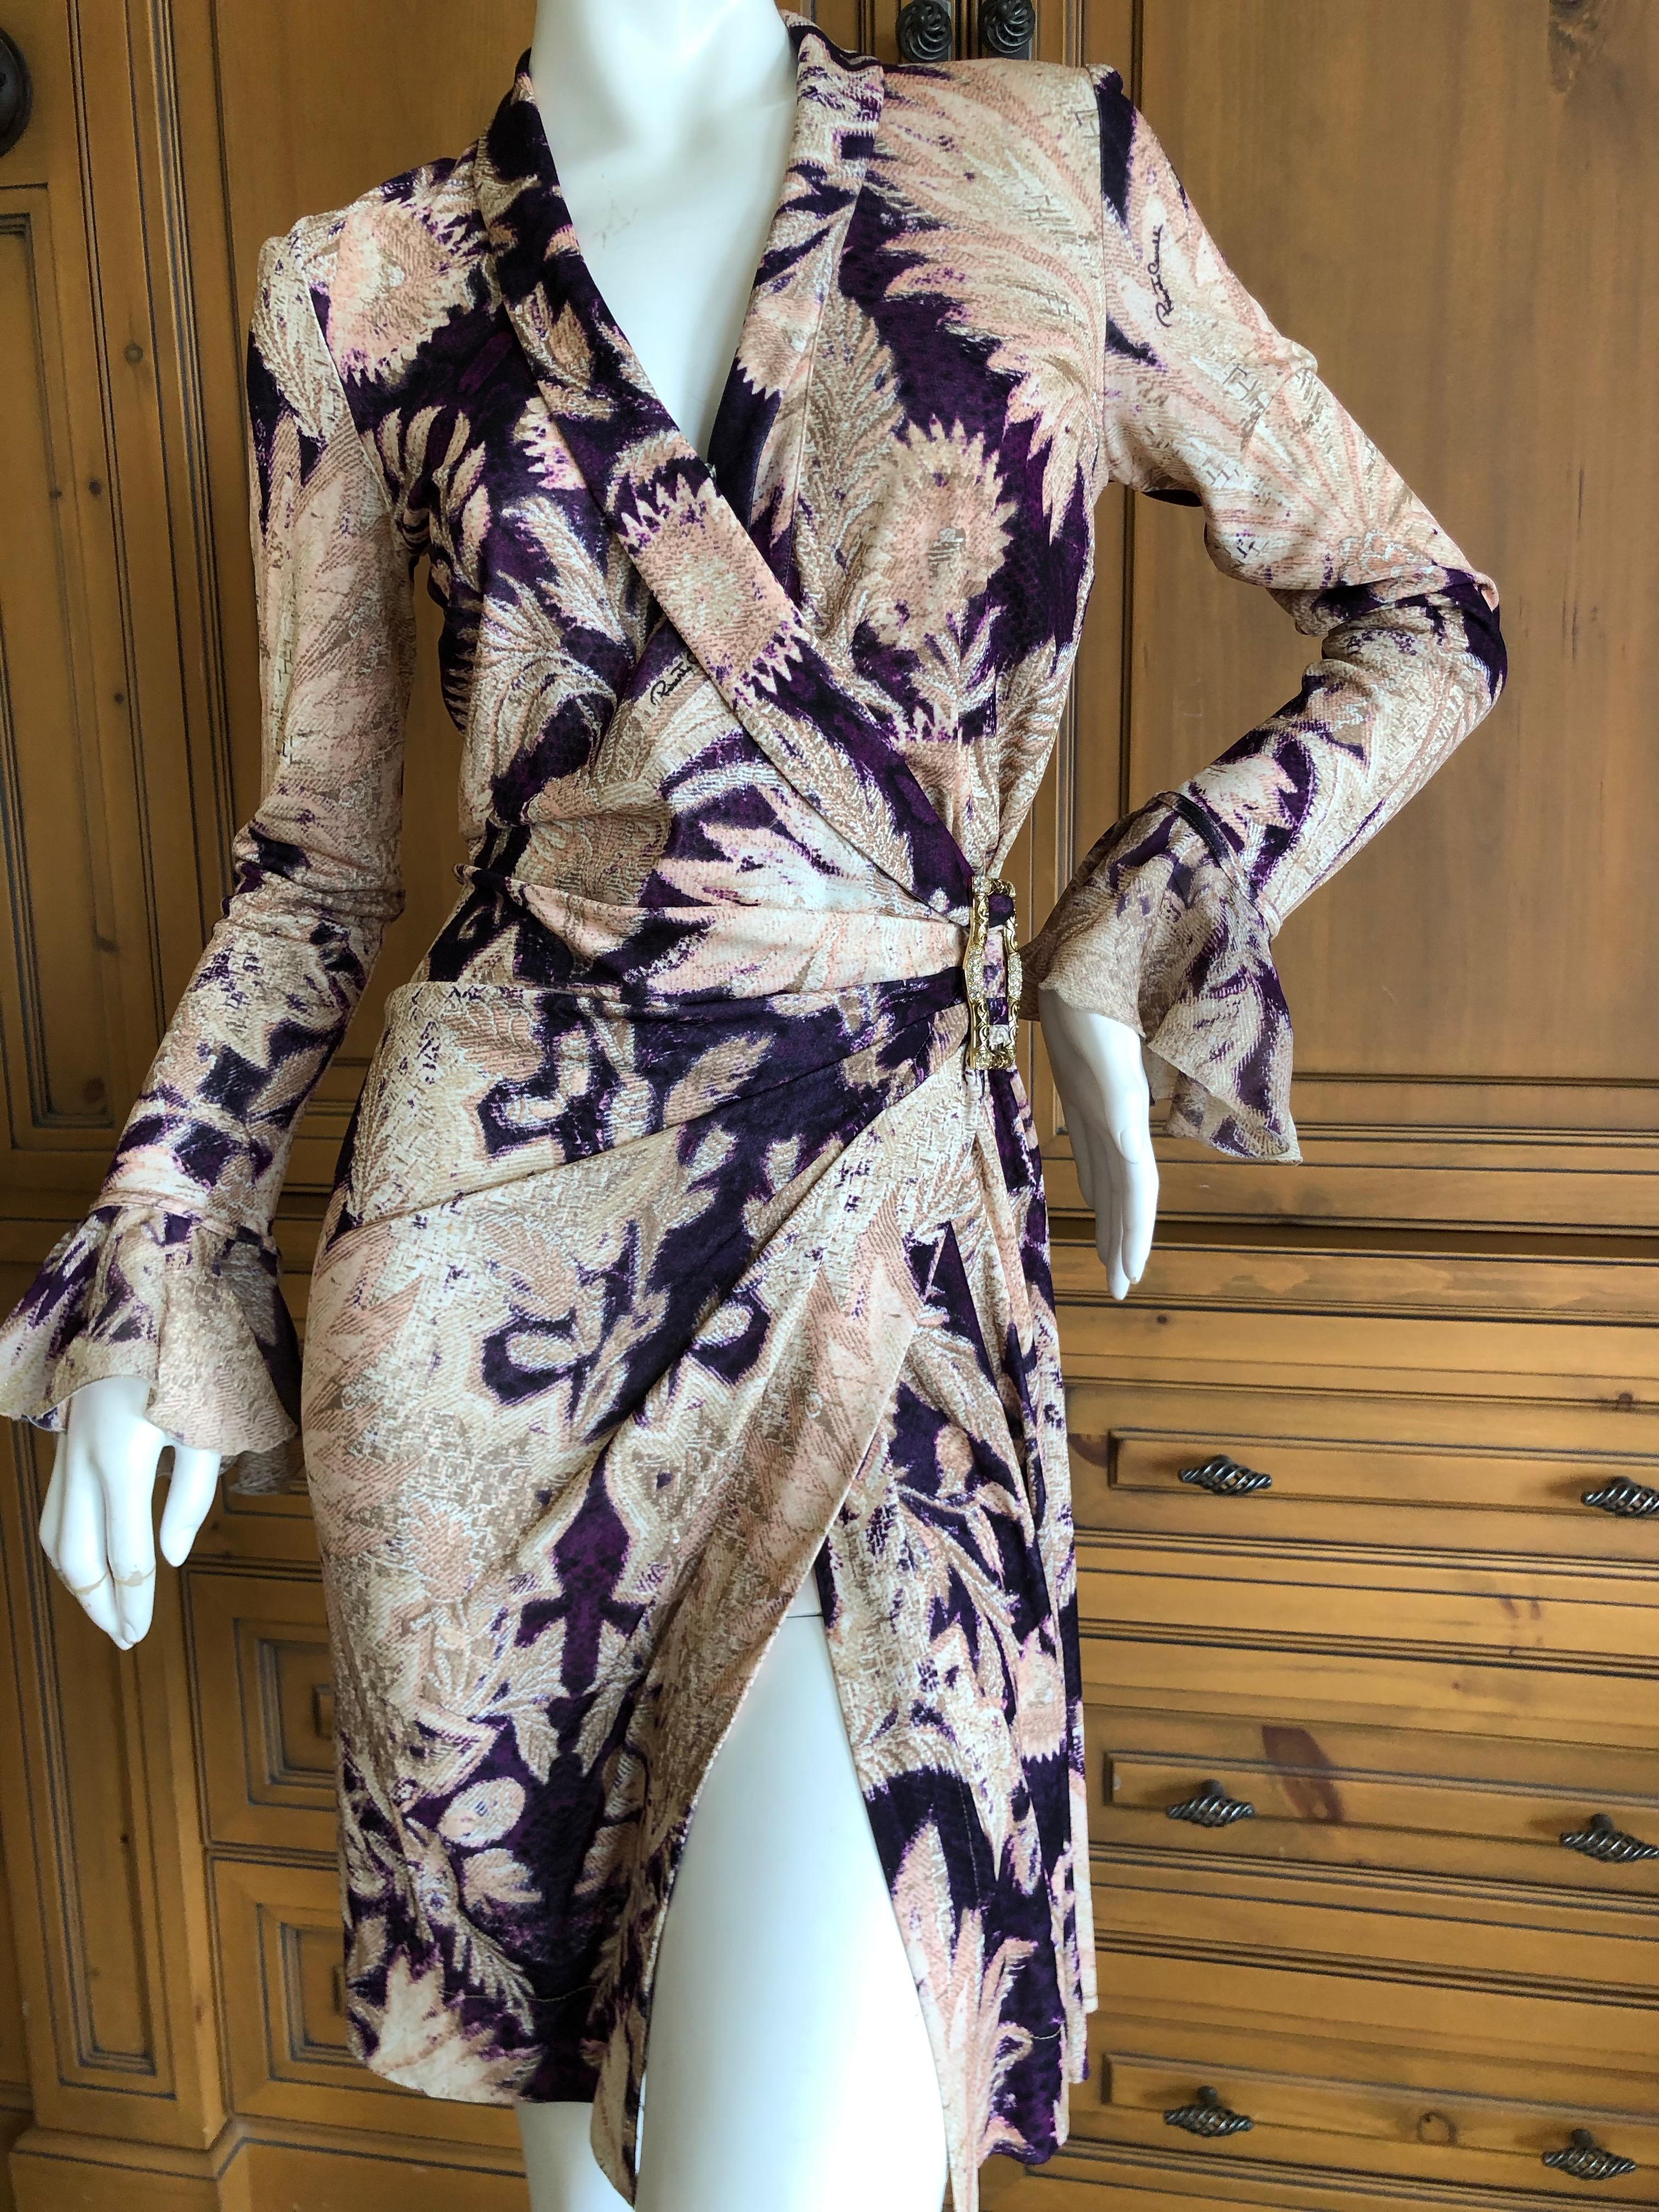 Roberto Cavalli Vintage Floral Print Cocktail Dress with Side Ornament In Excellent Condition For Sale In Cloverdale, CA